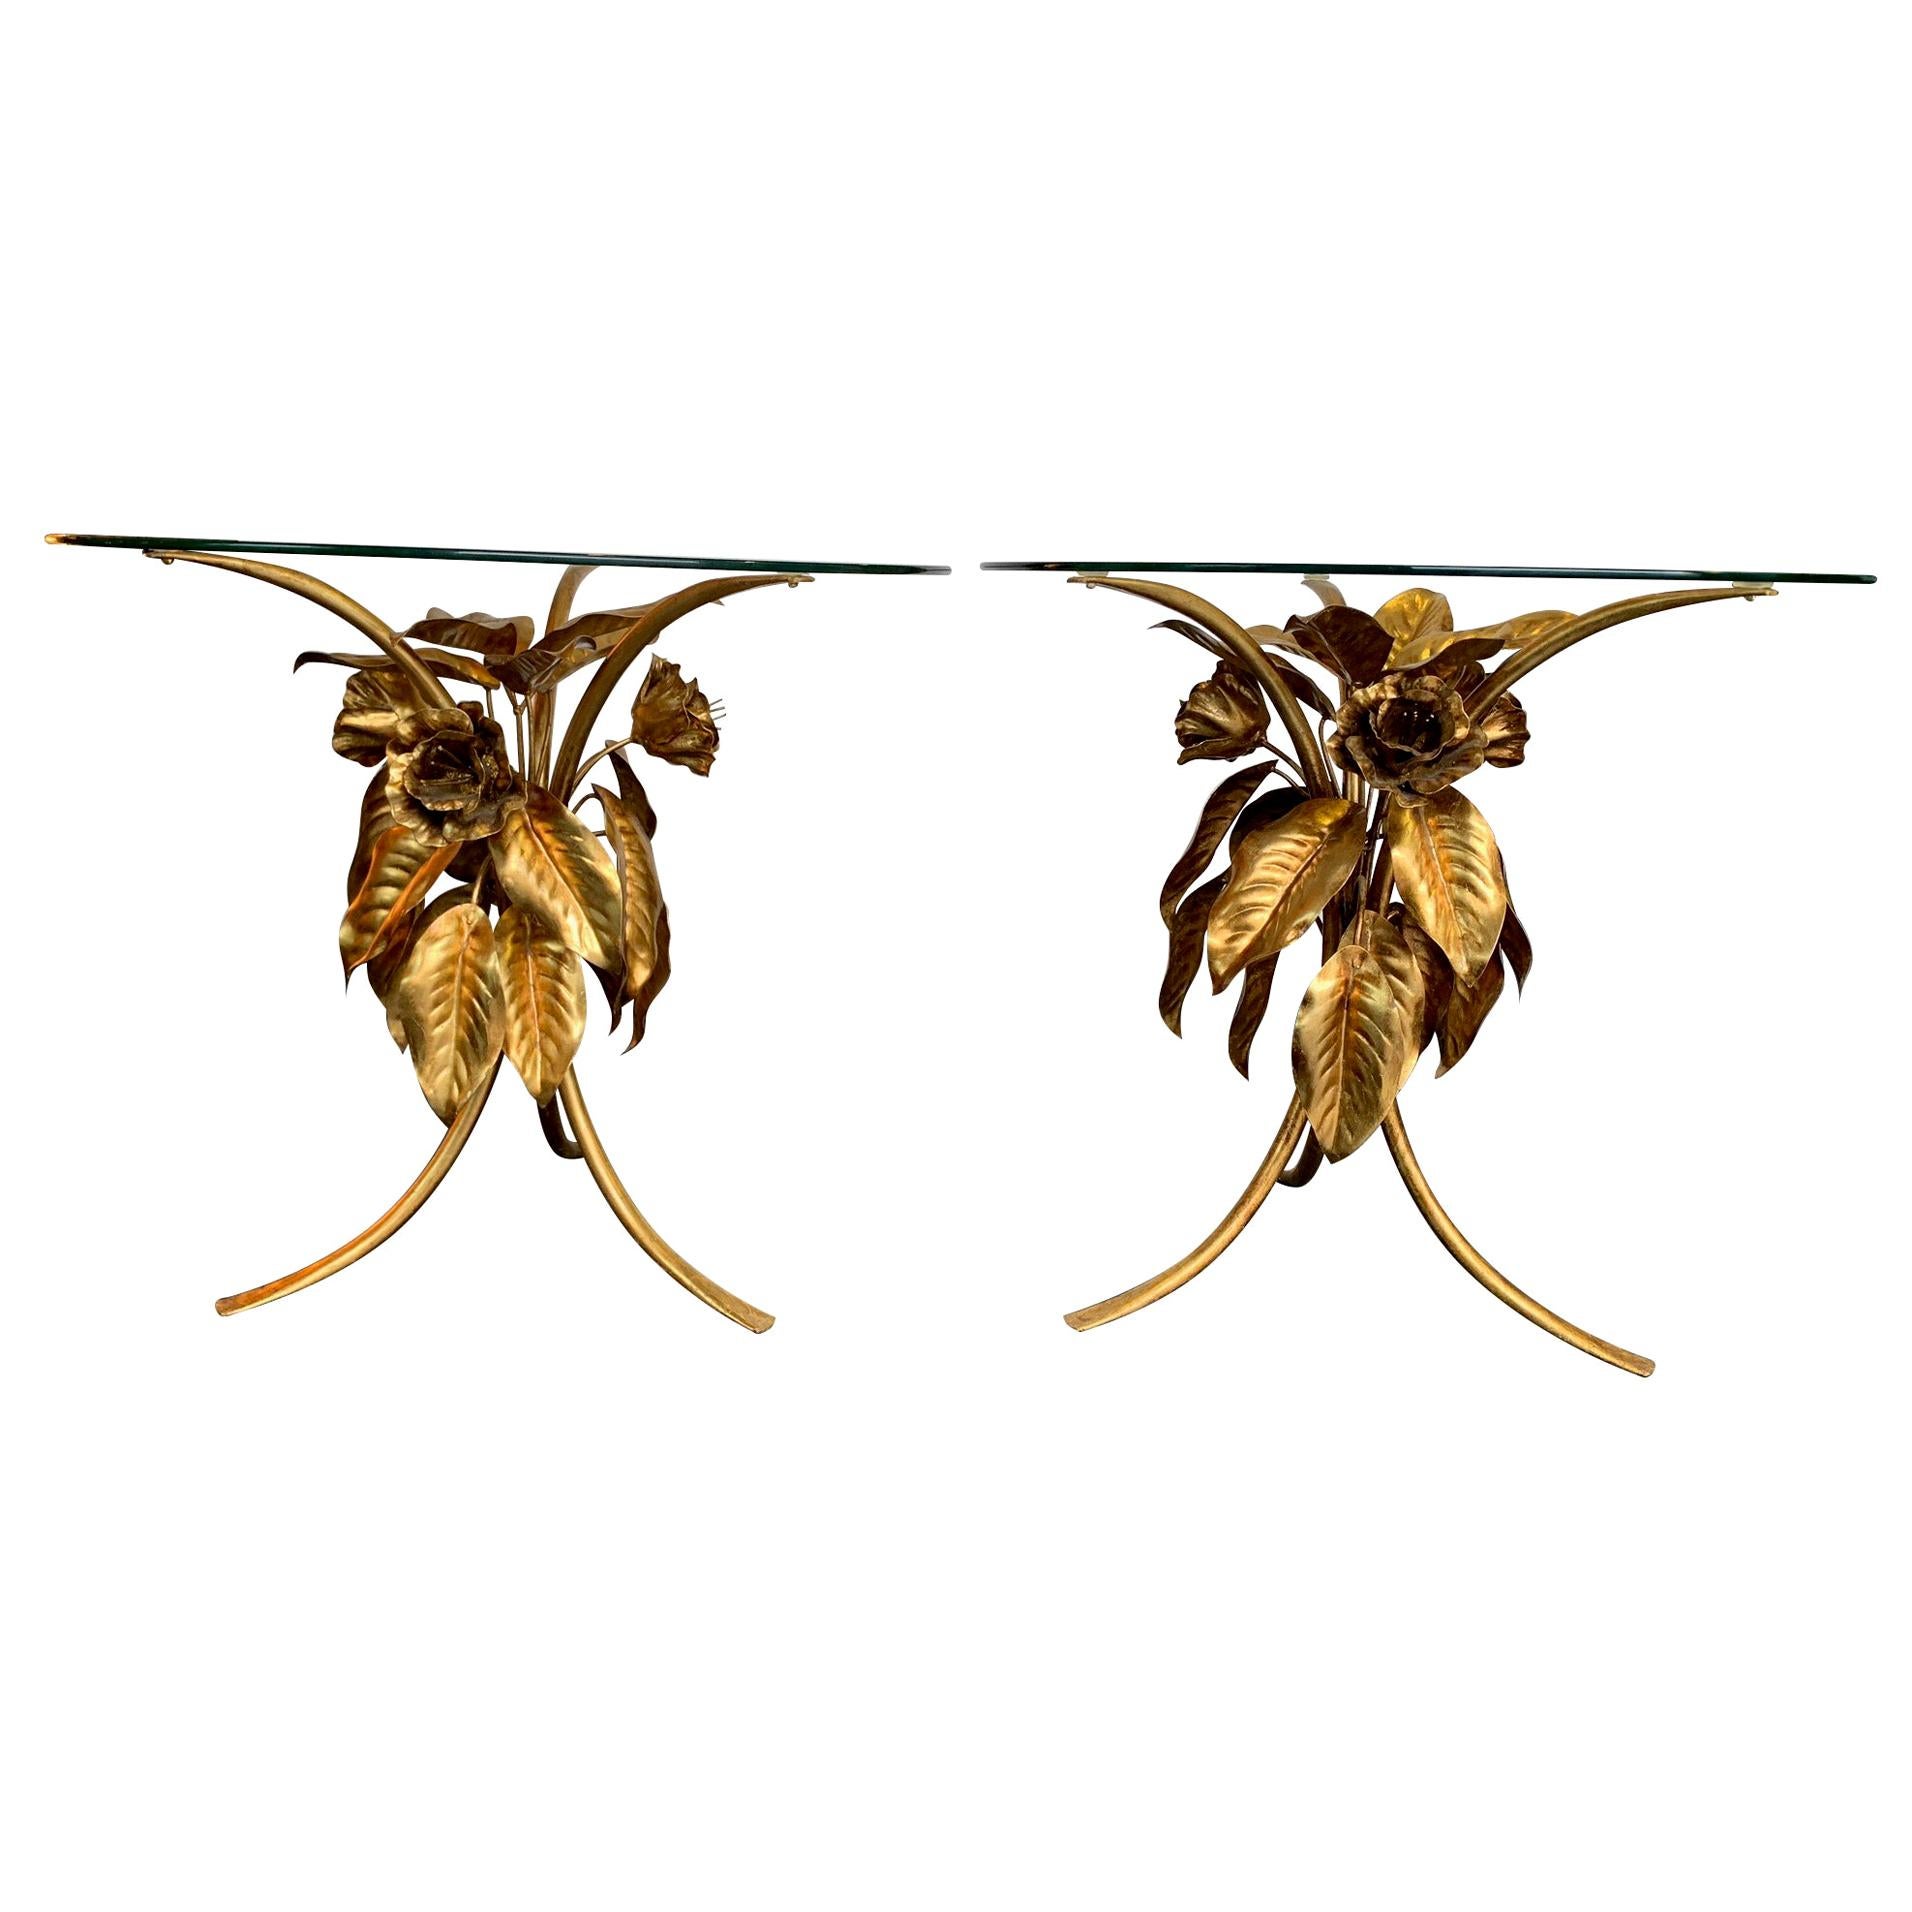 Pair of 1960s French Gilt Metal Side Tables with Flowers and Leaf Bases